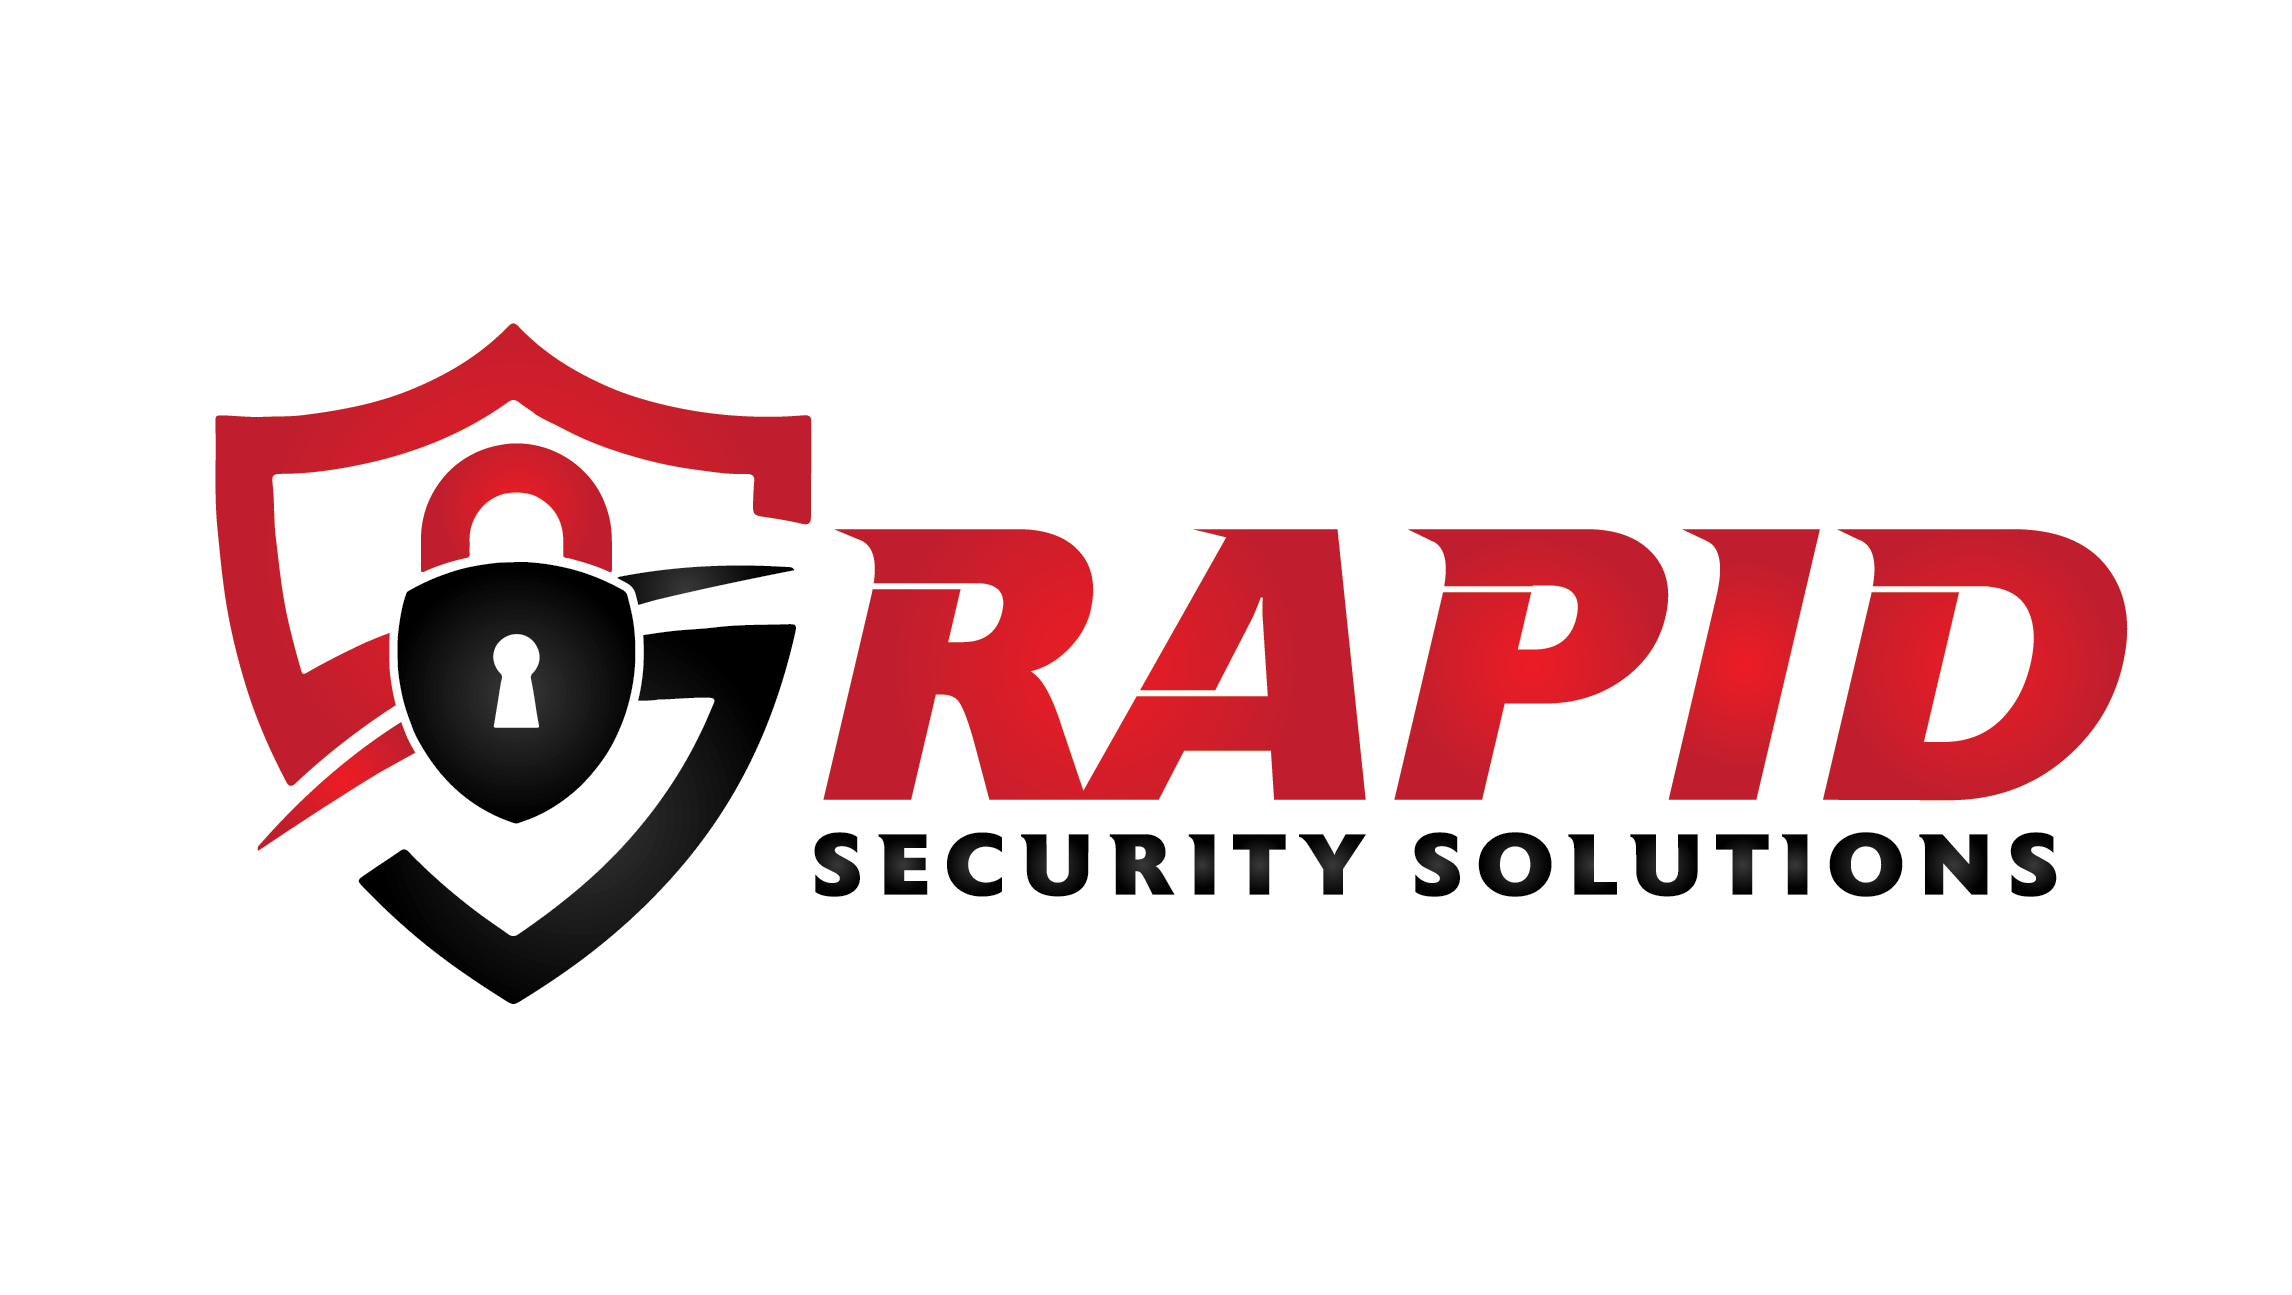 RAPID SECURITY SOLUTIONS